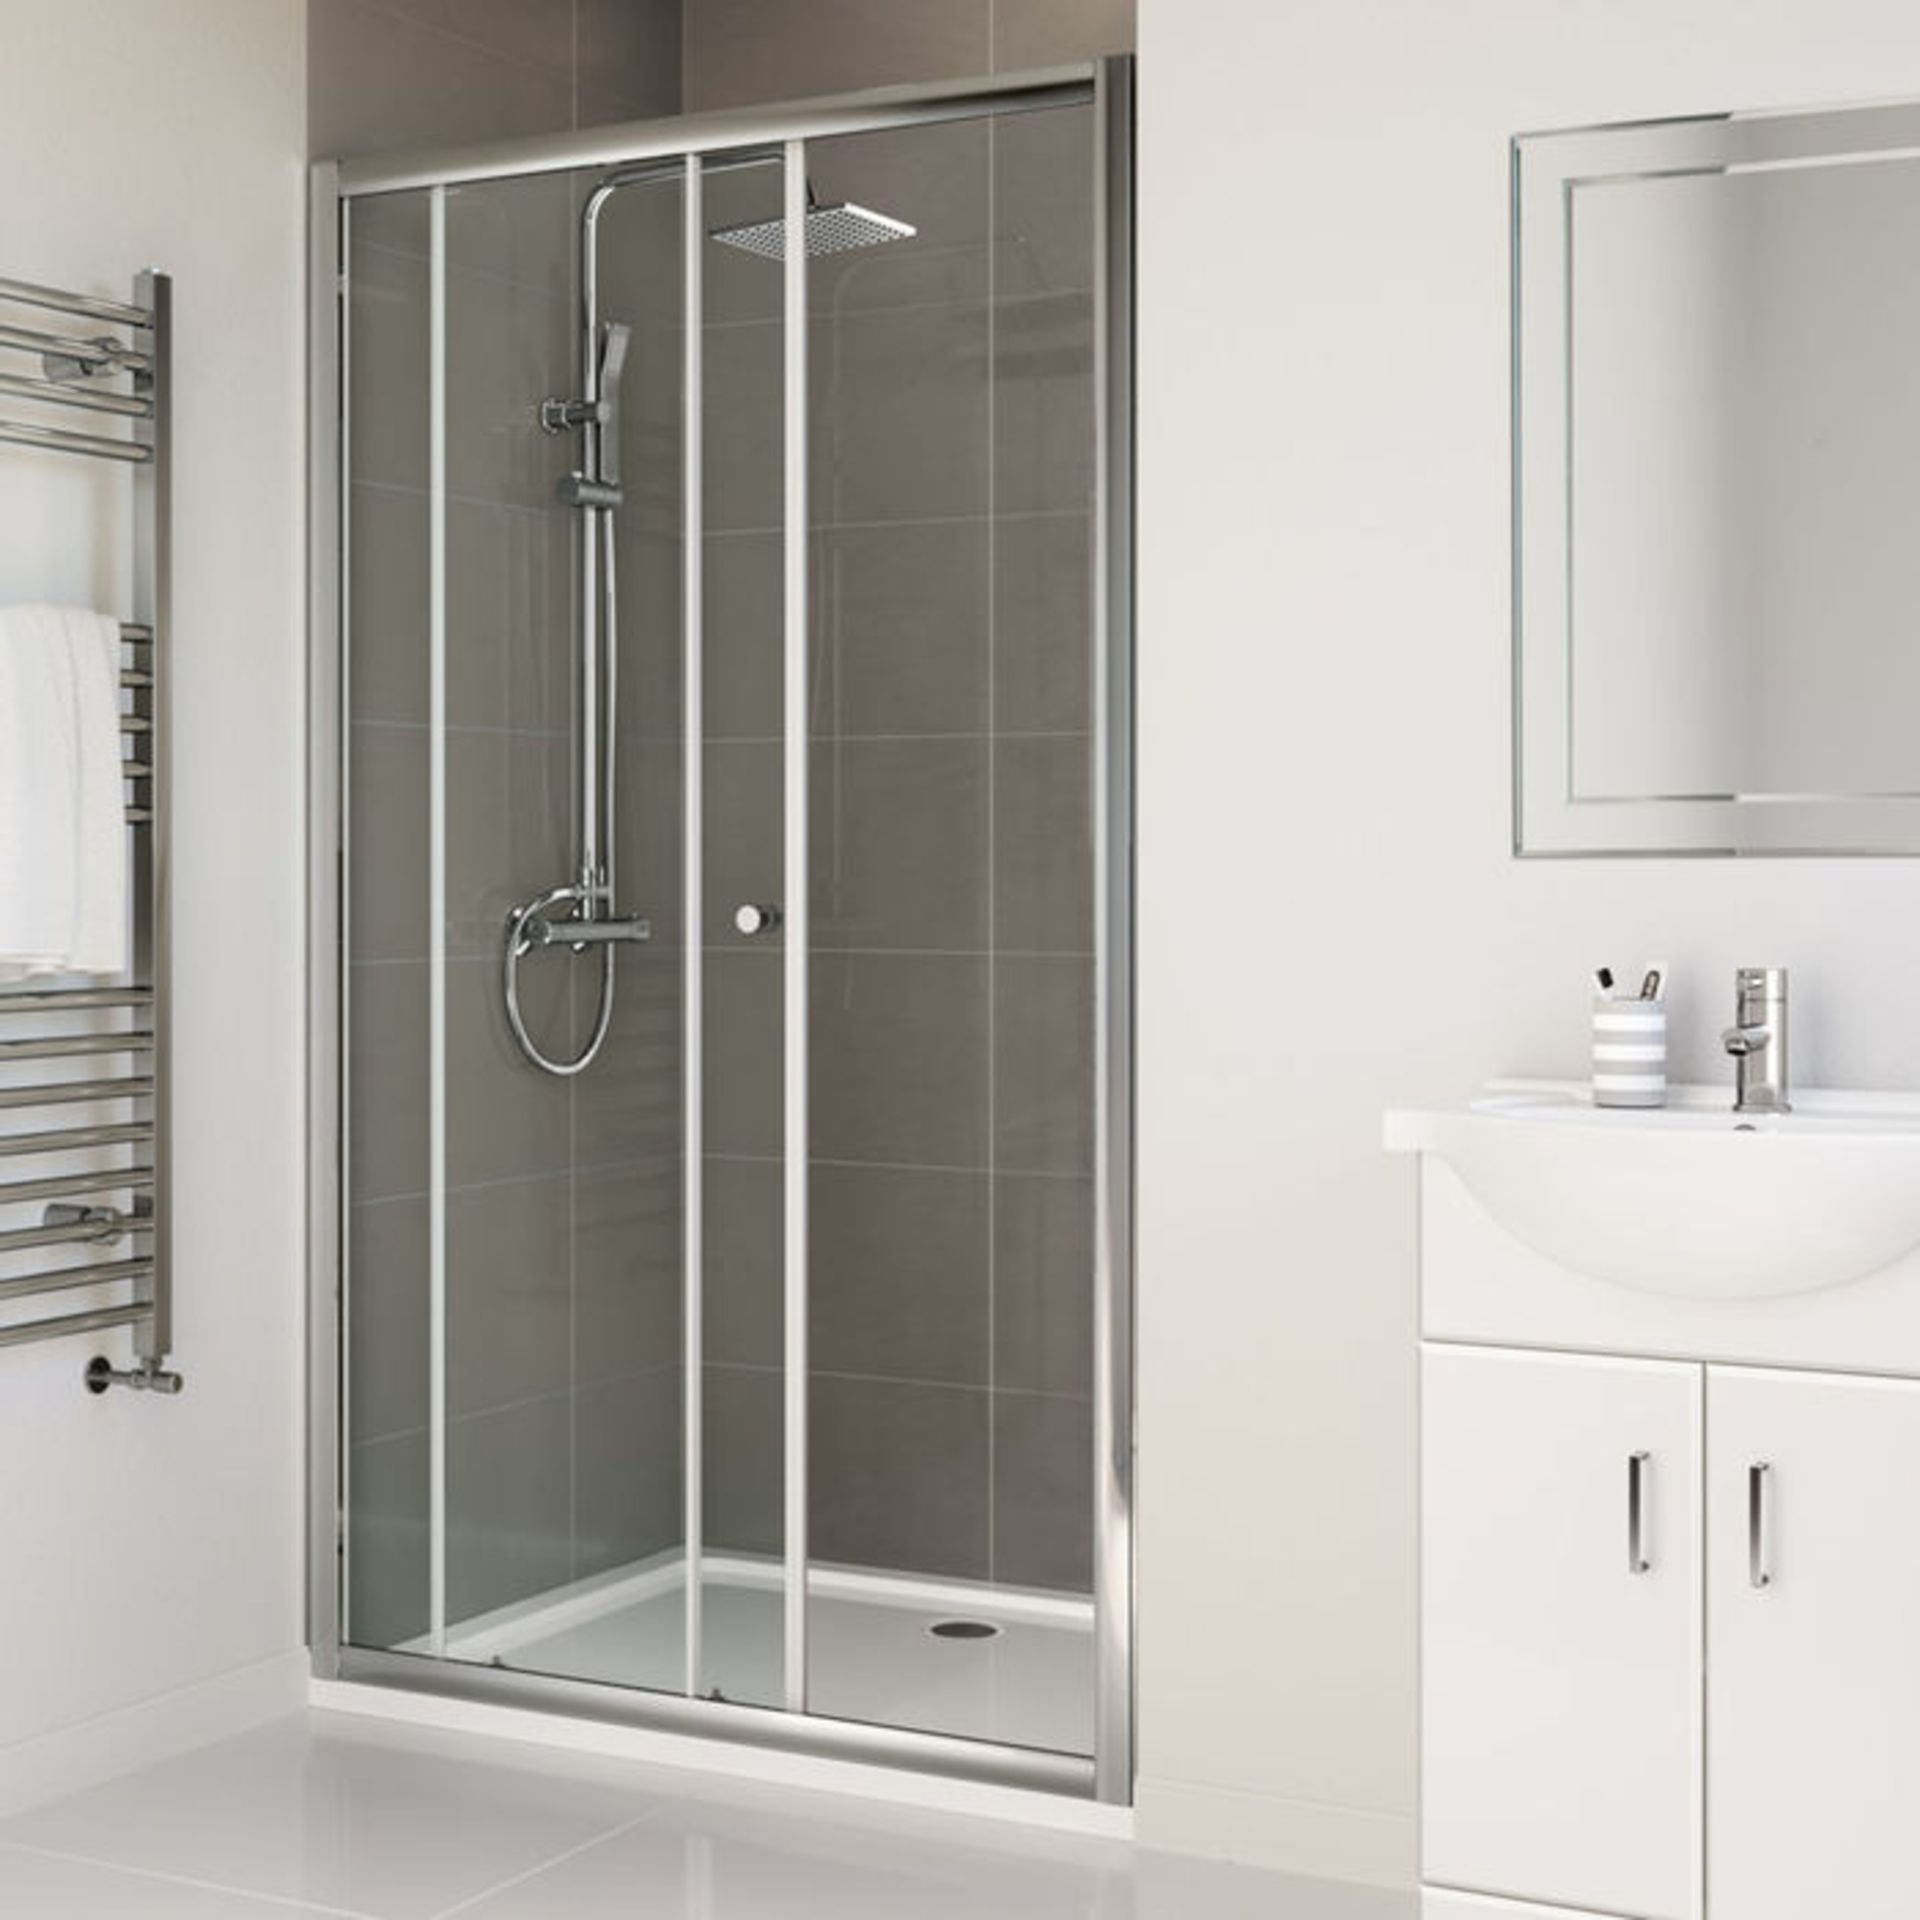 New (J12) 1000mm - Elements Sliding Shower Door. RRP £349.99. 6mm Safety Glass Fully Waterproof... - Image 2 of 2